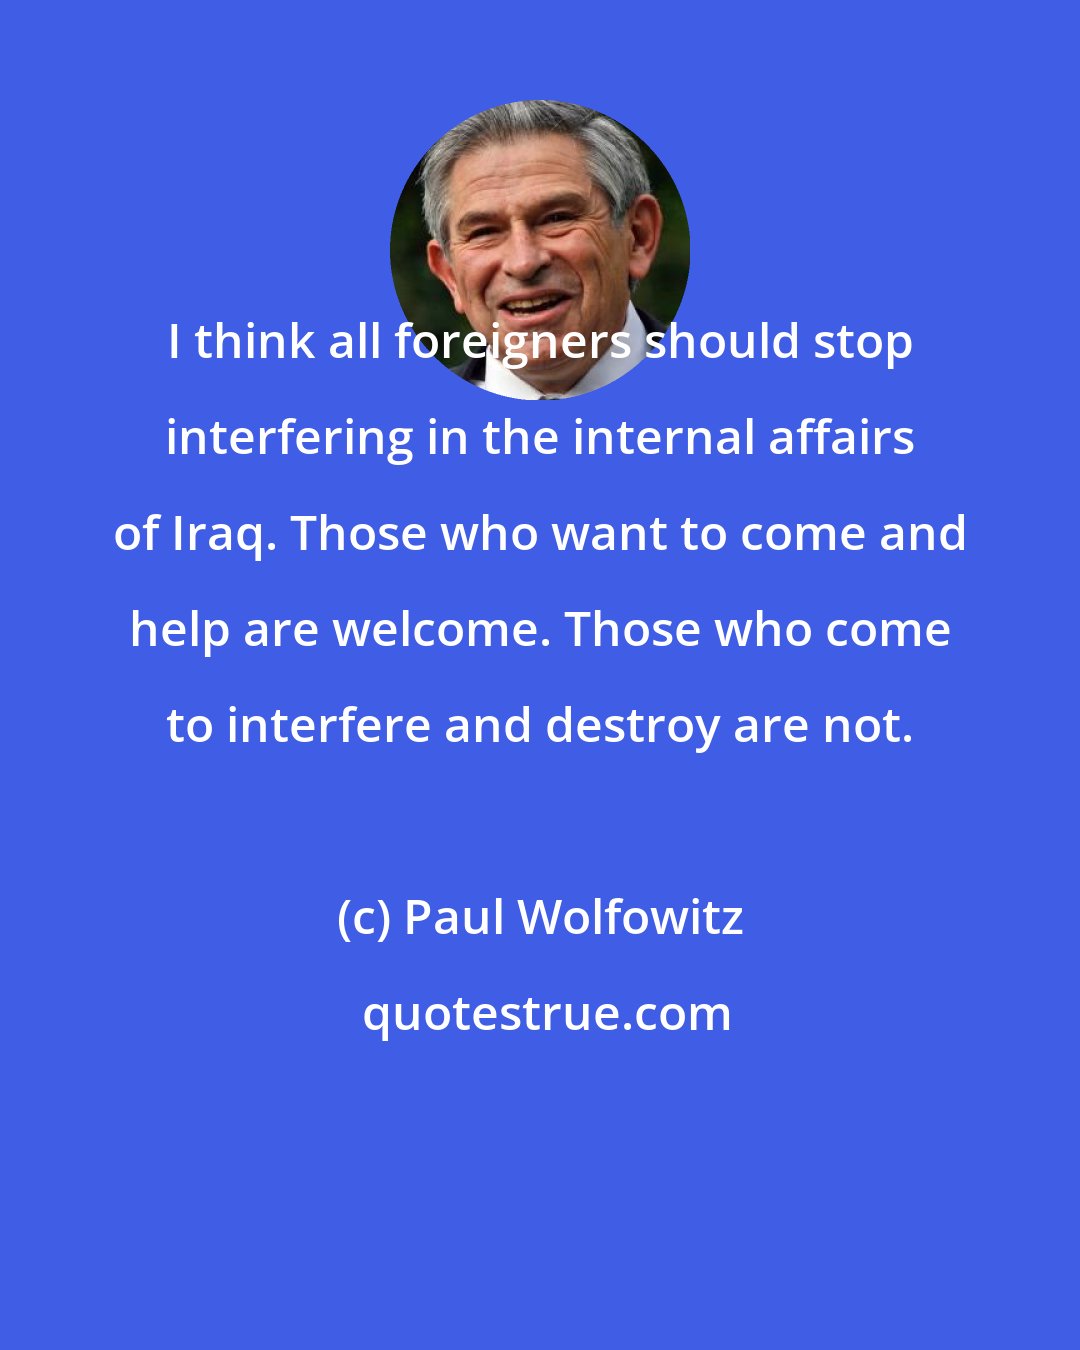 Paul Wolfowitz: I think all foreigners should stop interfering in the internal affairs of Iraq. Those who want to come and help are welcome. Those who come to interfere and destroy are not.